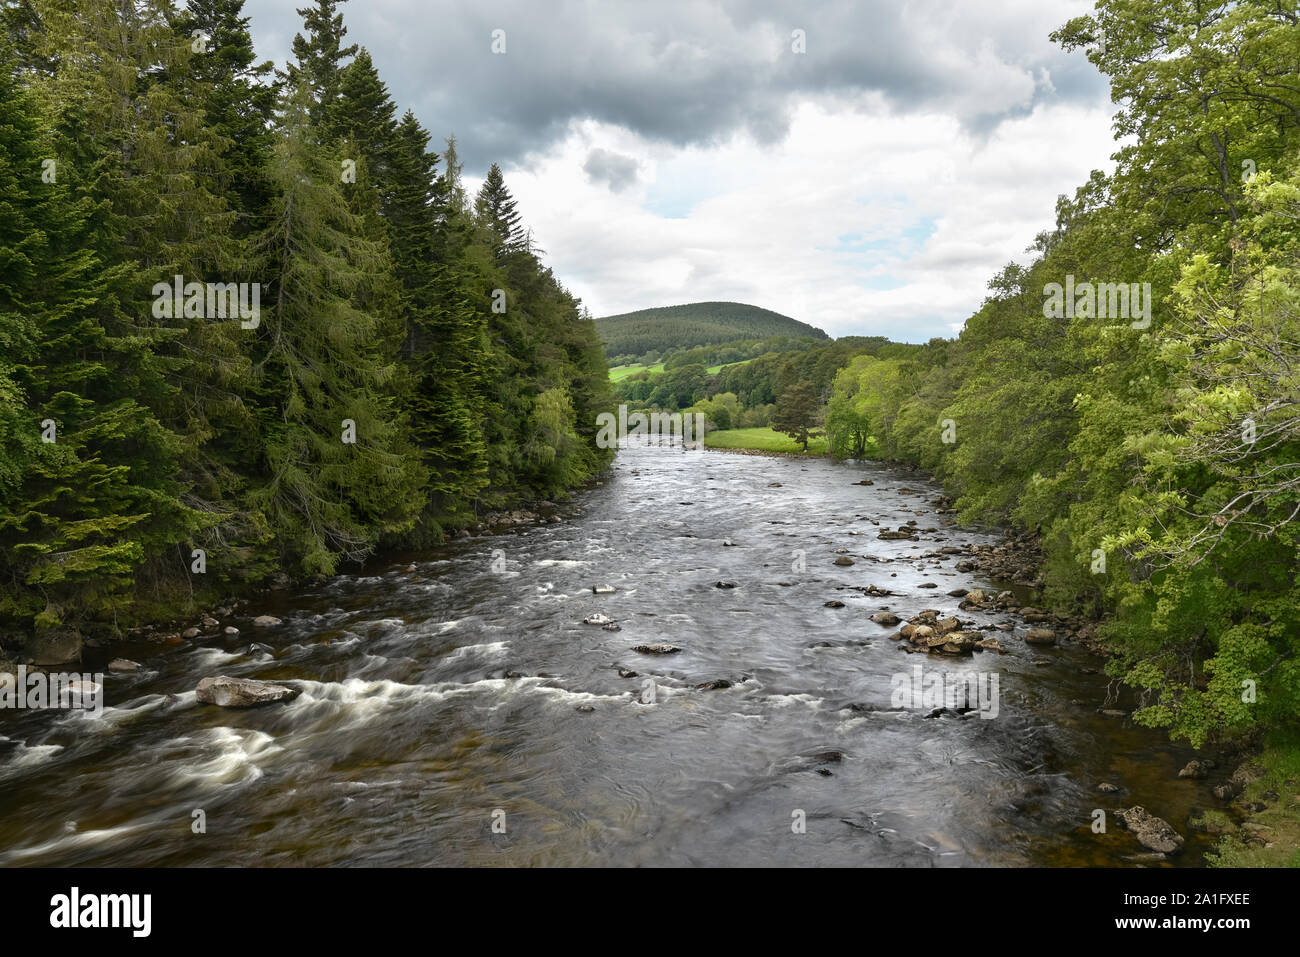 Mountain river flowing through a wooded valley on a cloudy summer day Stock Photo